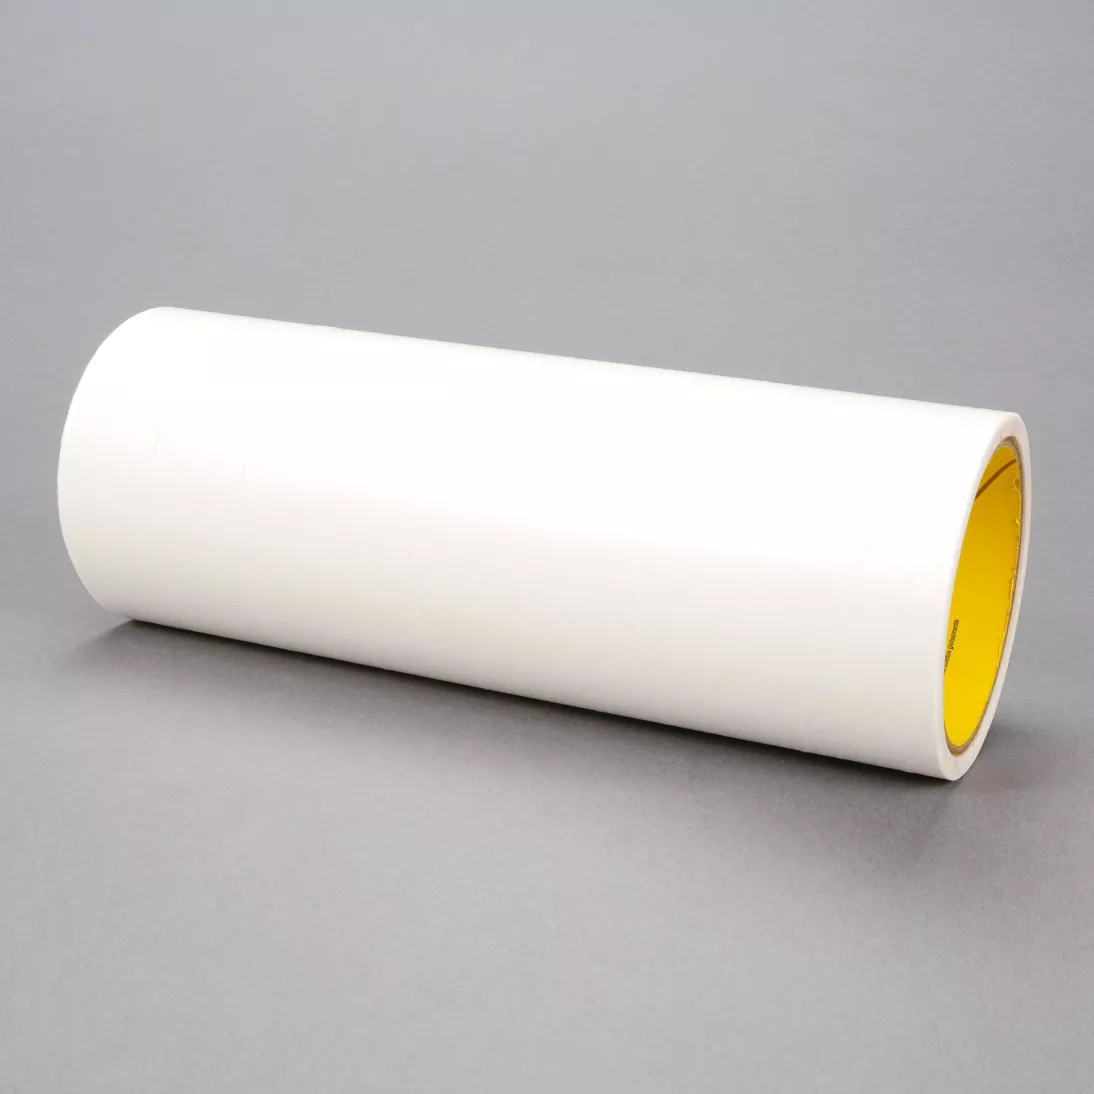 3M™ Double Coated Tape 9816M, White, 60 in x 250 yd, 3.5 mil, 1 roll per
case, 9 roll per pallet